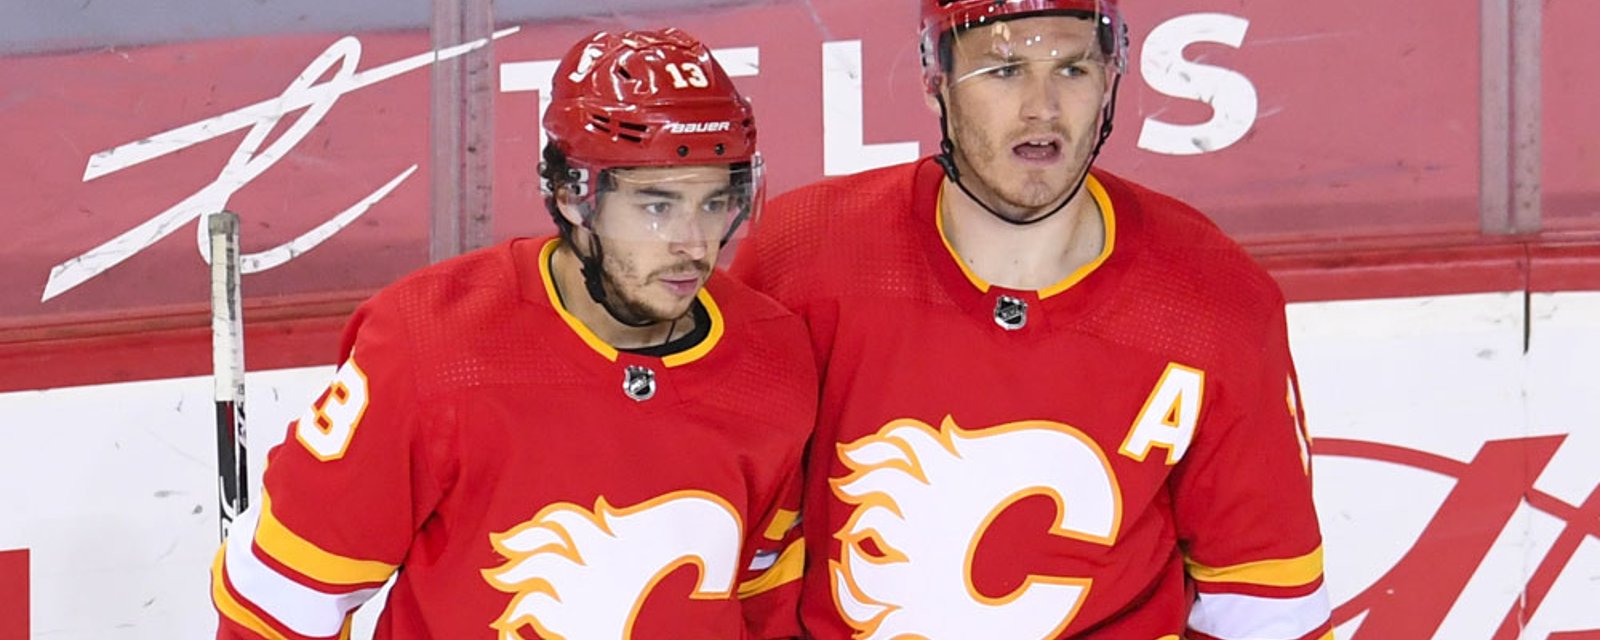 Rumor: Gaudreau gone and Tkachuk wants out due to Canada's overly strict mandates and restrictions 